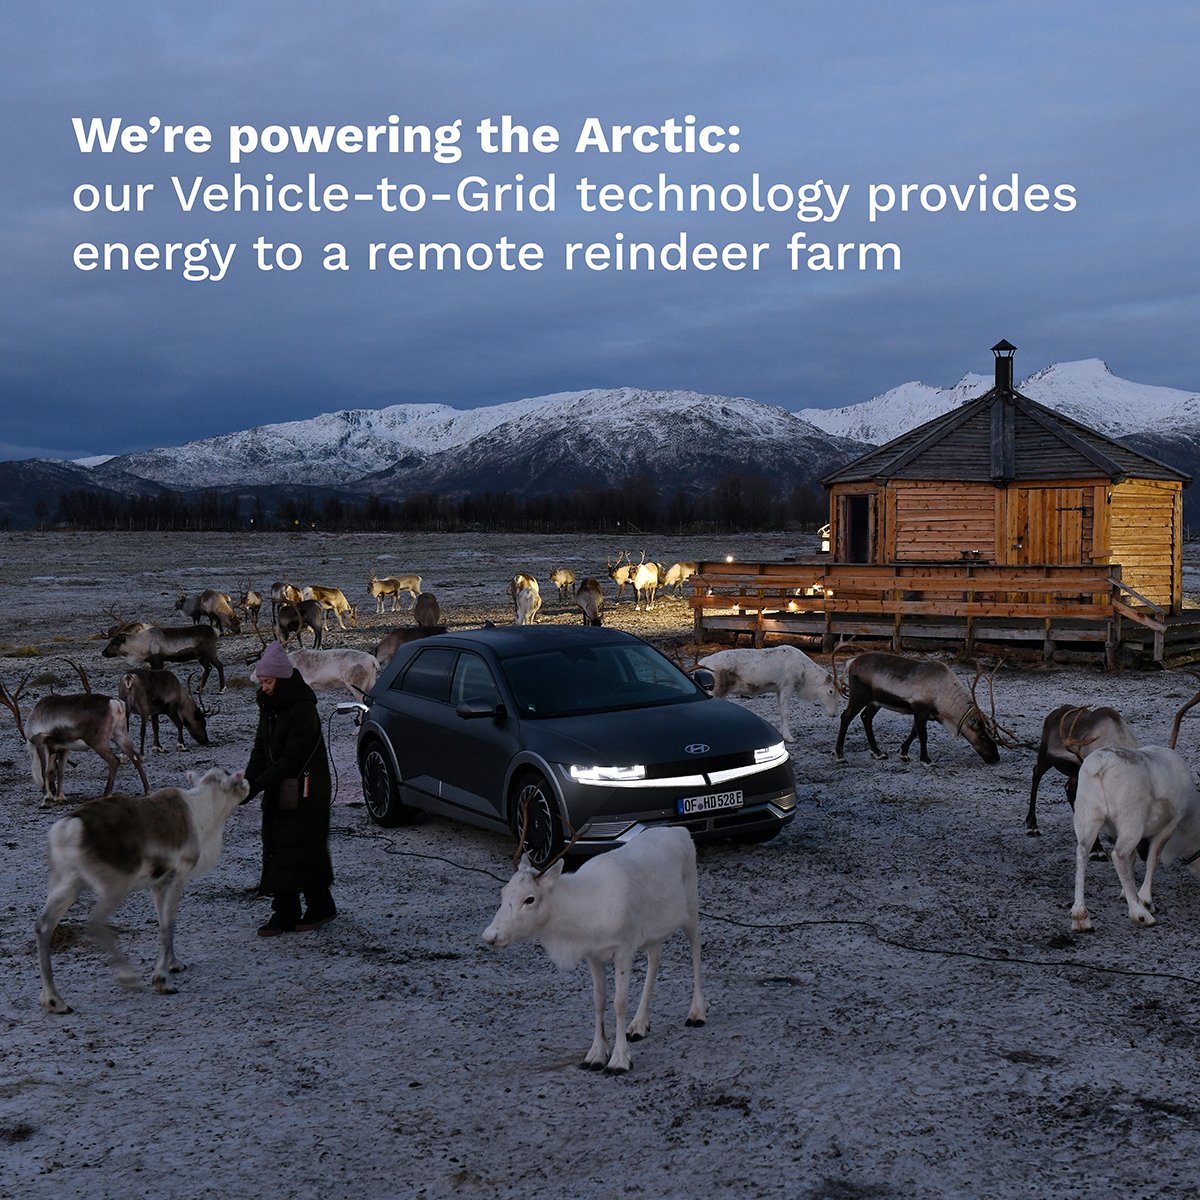 IONIQ 5’s Vehicle-to-Load- technology can be used as a source of portable power across the globe. In Tromsø, Norway we put this to live by empowering a whole reindeer farm with just EV energy. 

Know more about this fascinating story from the link: https://t.co/QTEVKp2ovb https://t.co/PZmKw6pURw